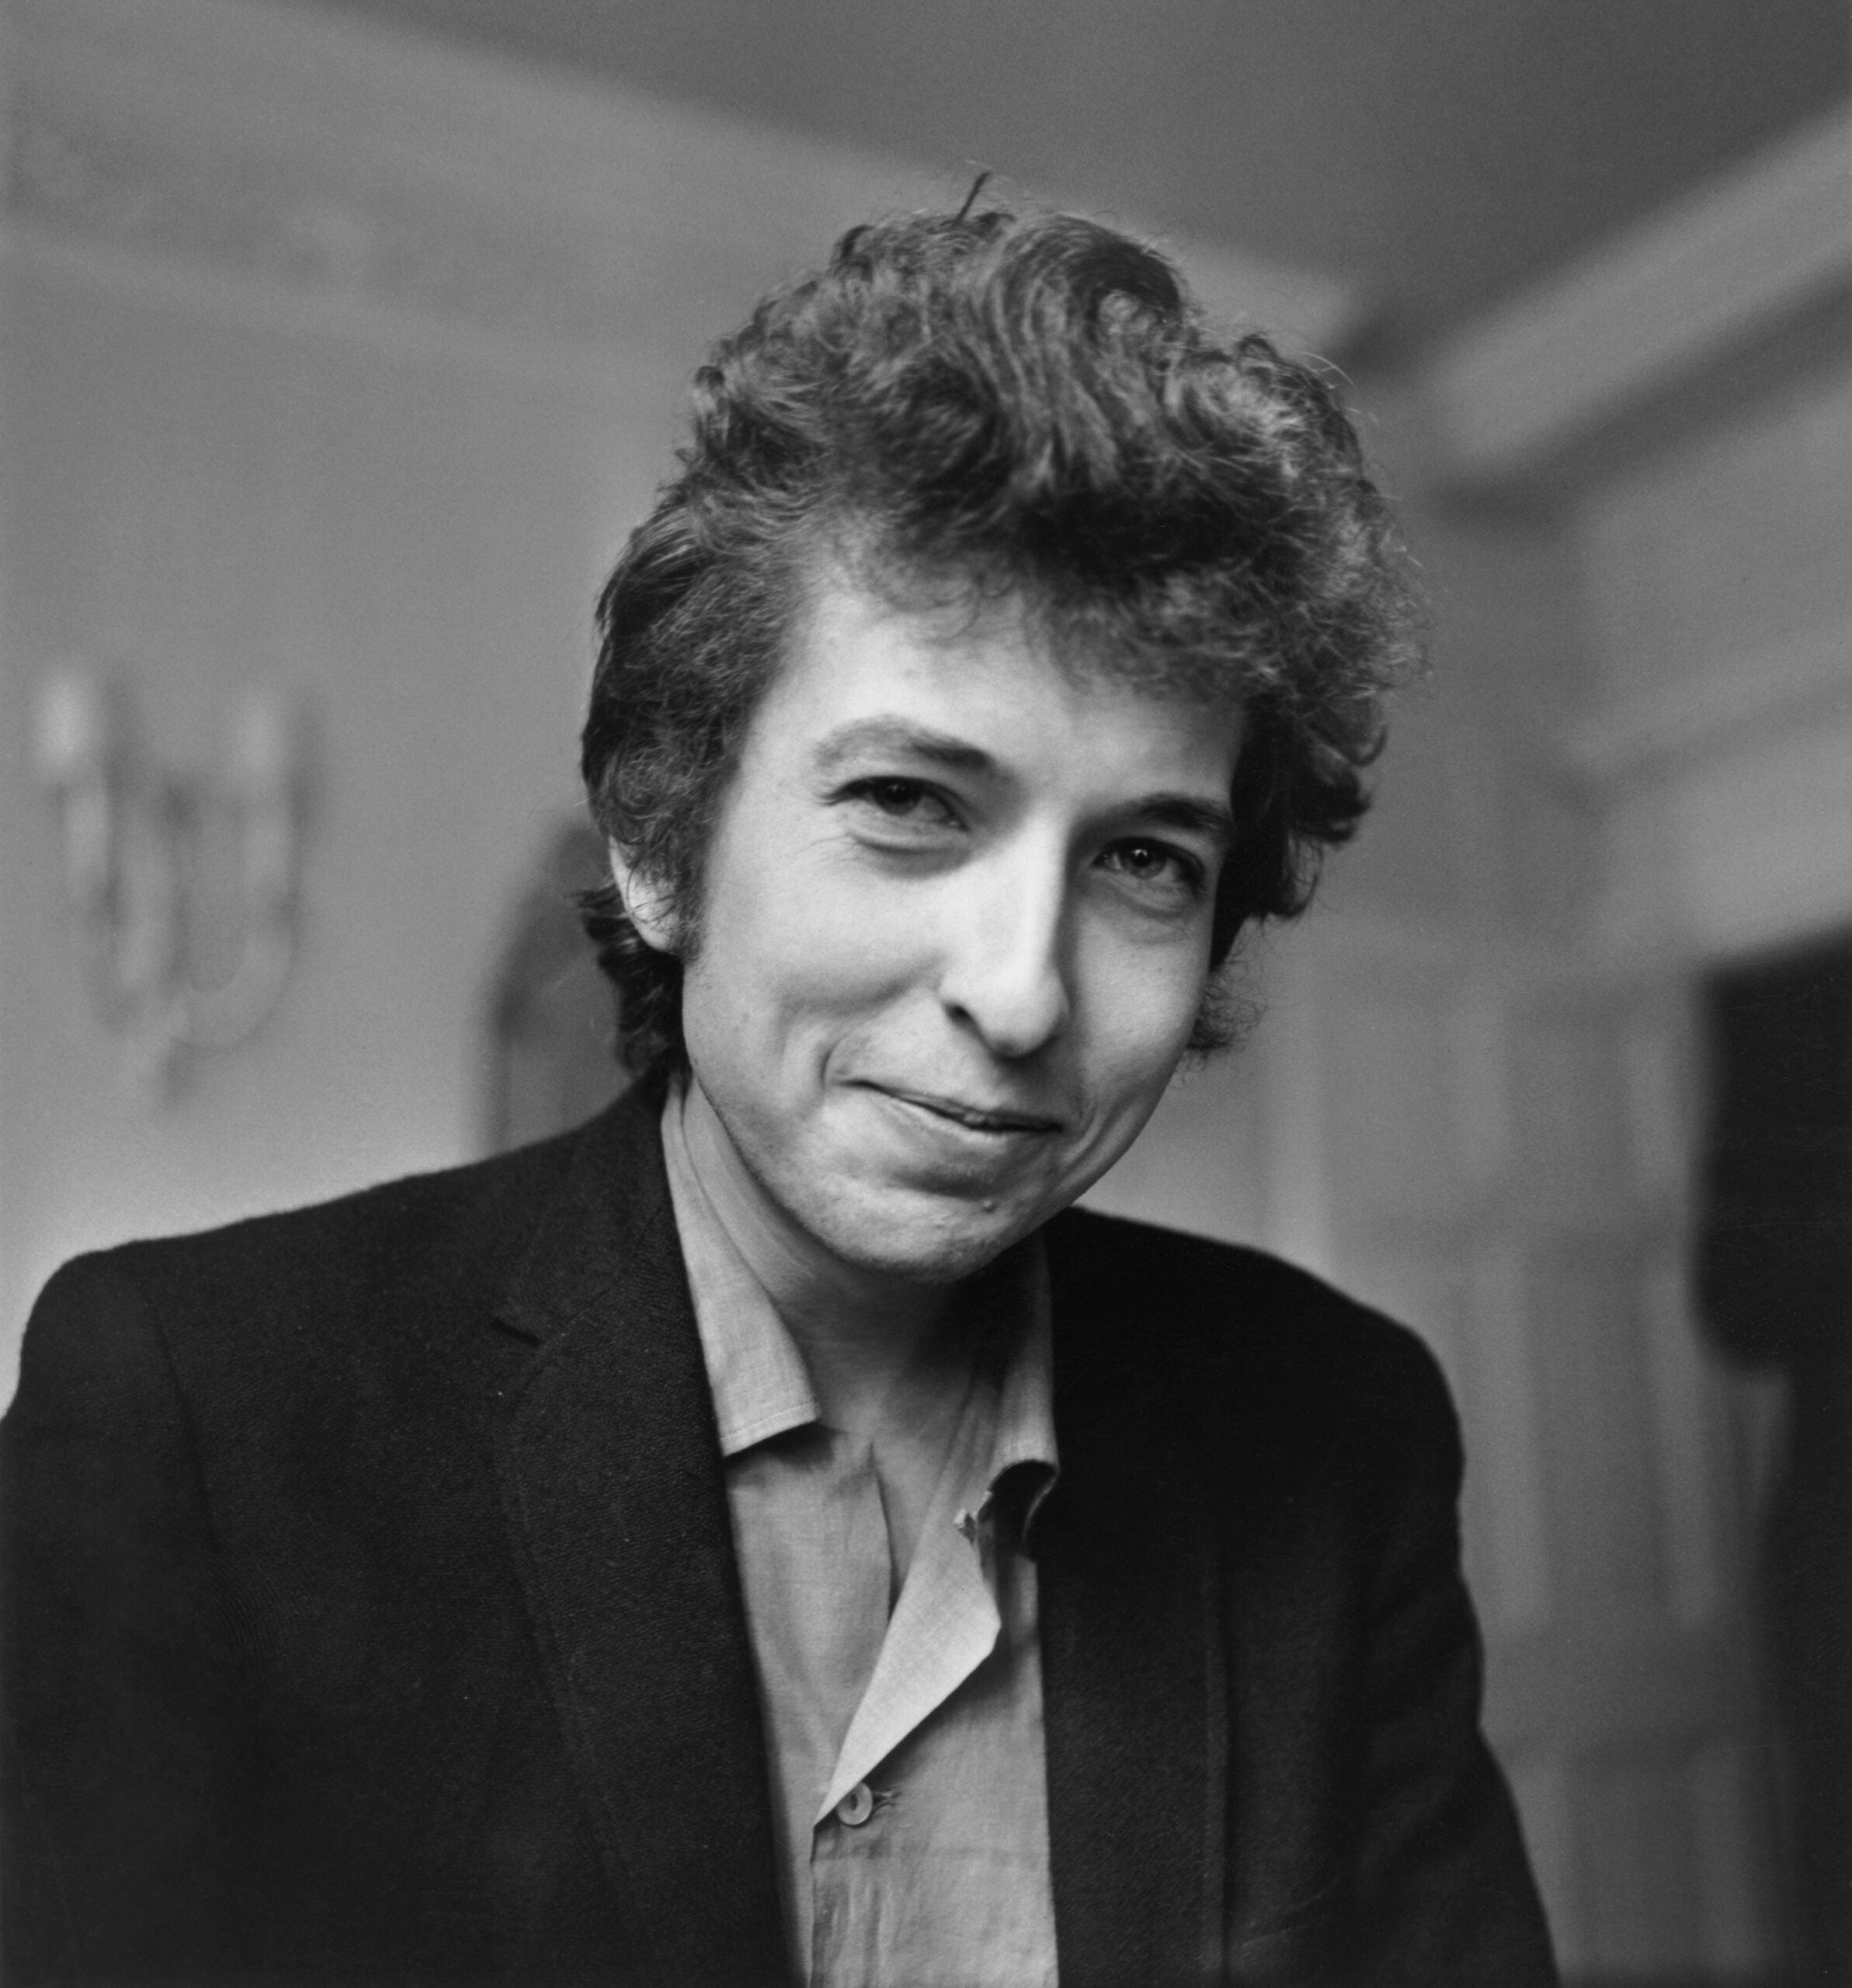 Bob Dylan at 80: There is dark, sly laughter behind his most puzzling lyrics